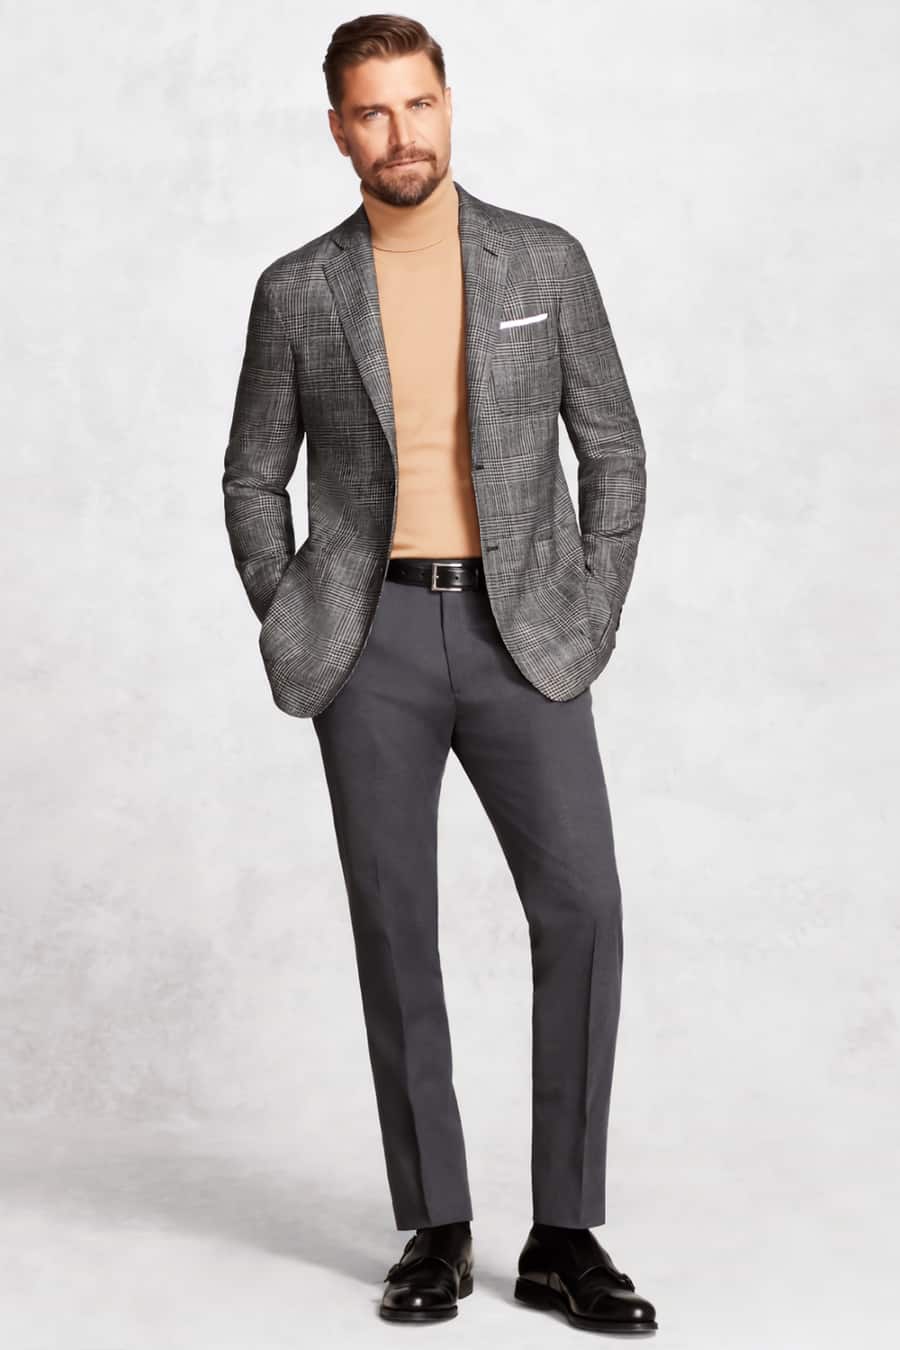 Men's charcoal trousers, camel turtleneck, light grey check blazer and black leather monk-strap shoes separates outfit